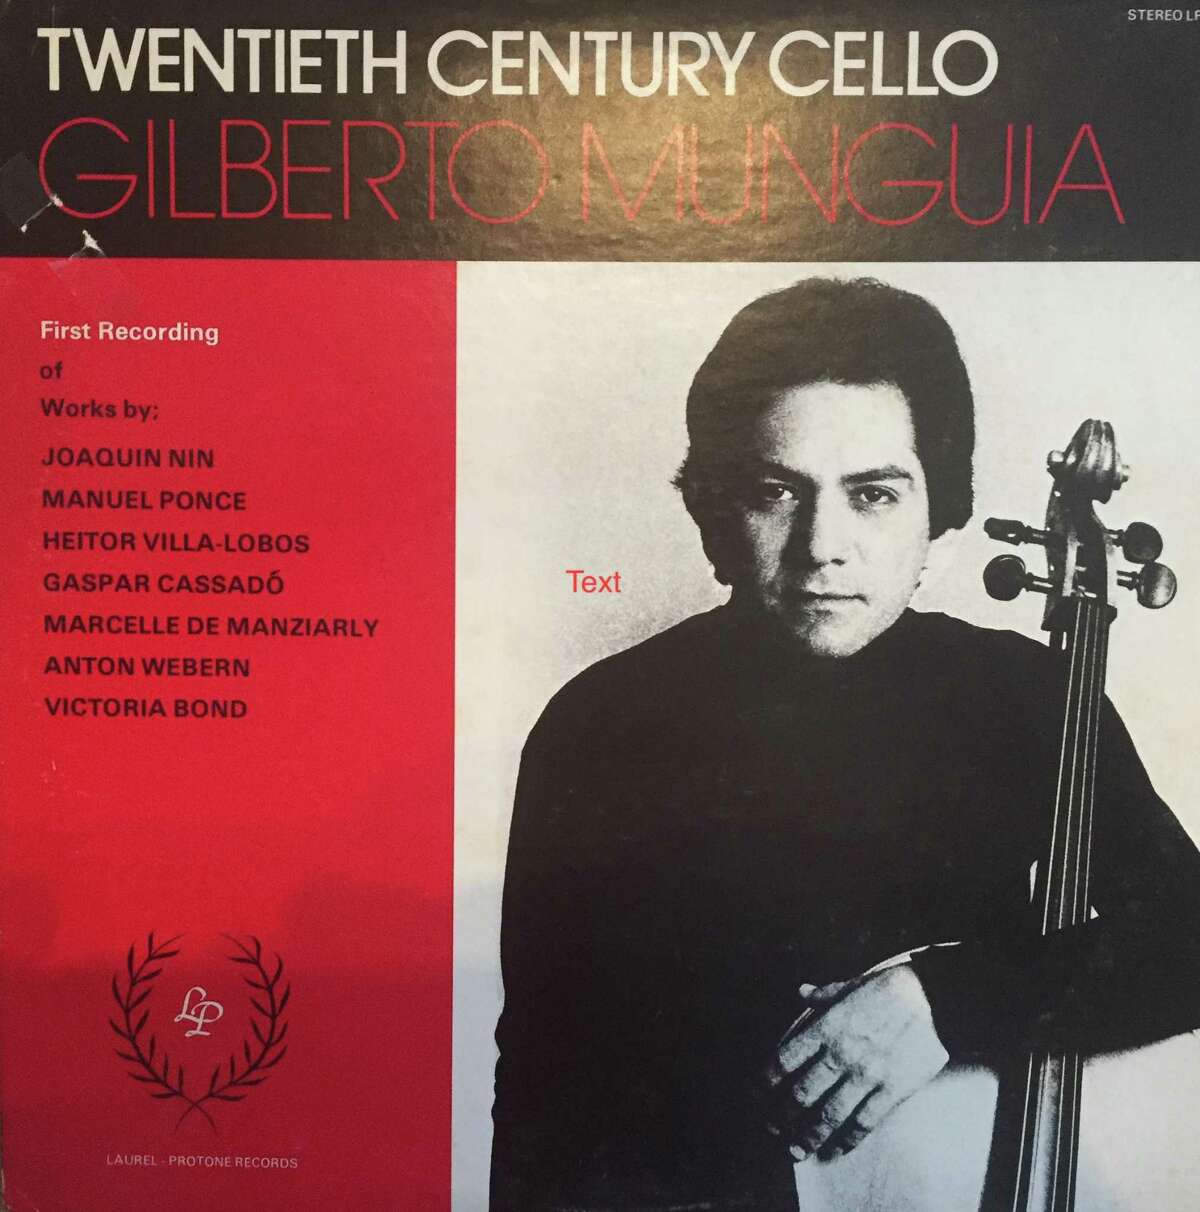 Cellist Gilbert Munguia, who performed several times in San Antonio, recorded at least one album, “Twentieth Century Cello,” featuring works by mostly Hispanic 20th-century composers. Originally from Kingsville, Munguia was an affiliate artist at Trinity University in 1977.